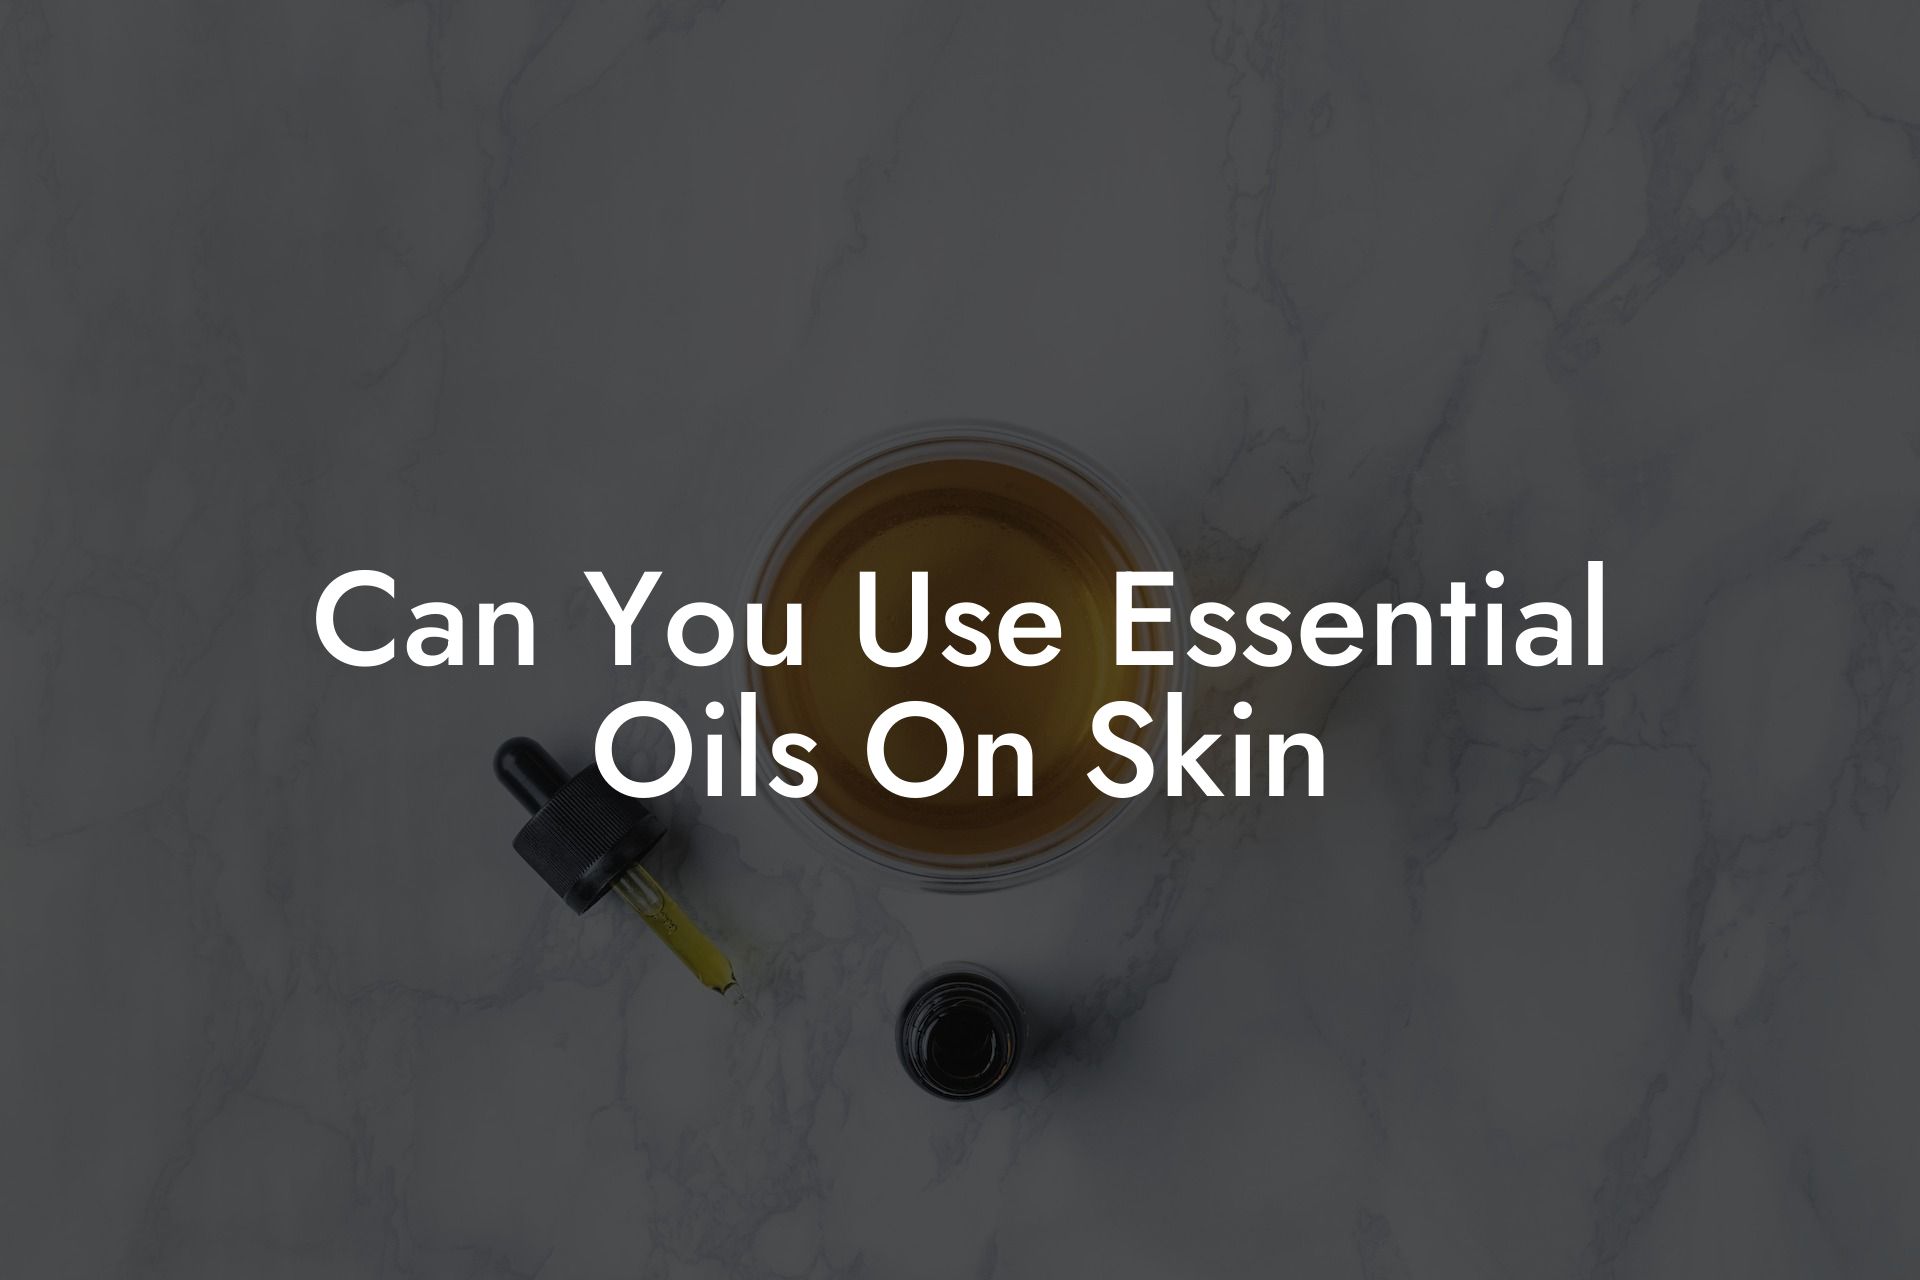 Can You Use Essential Oils On Skin